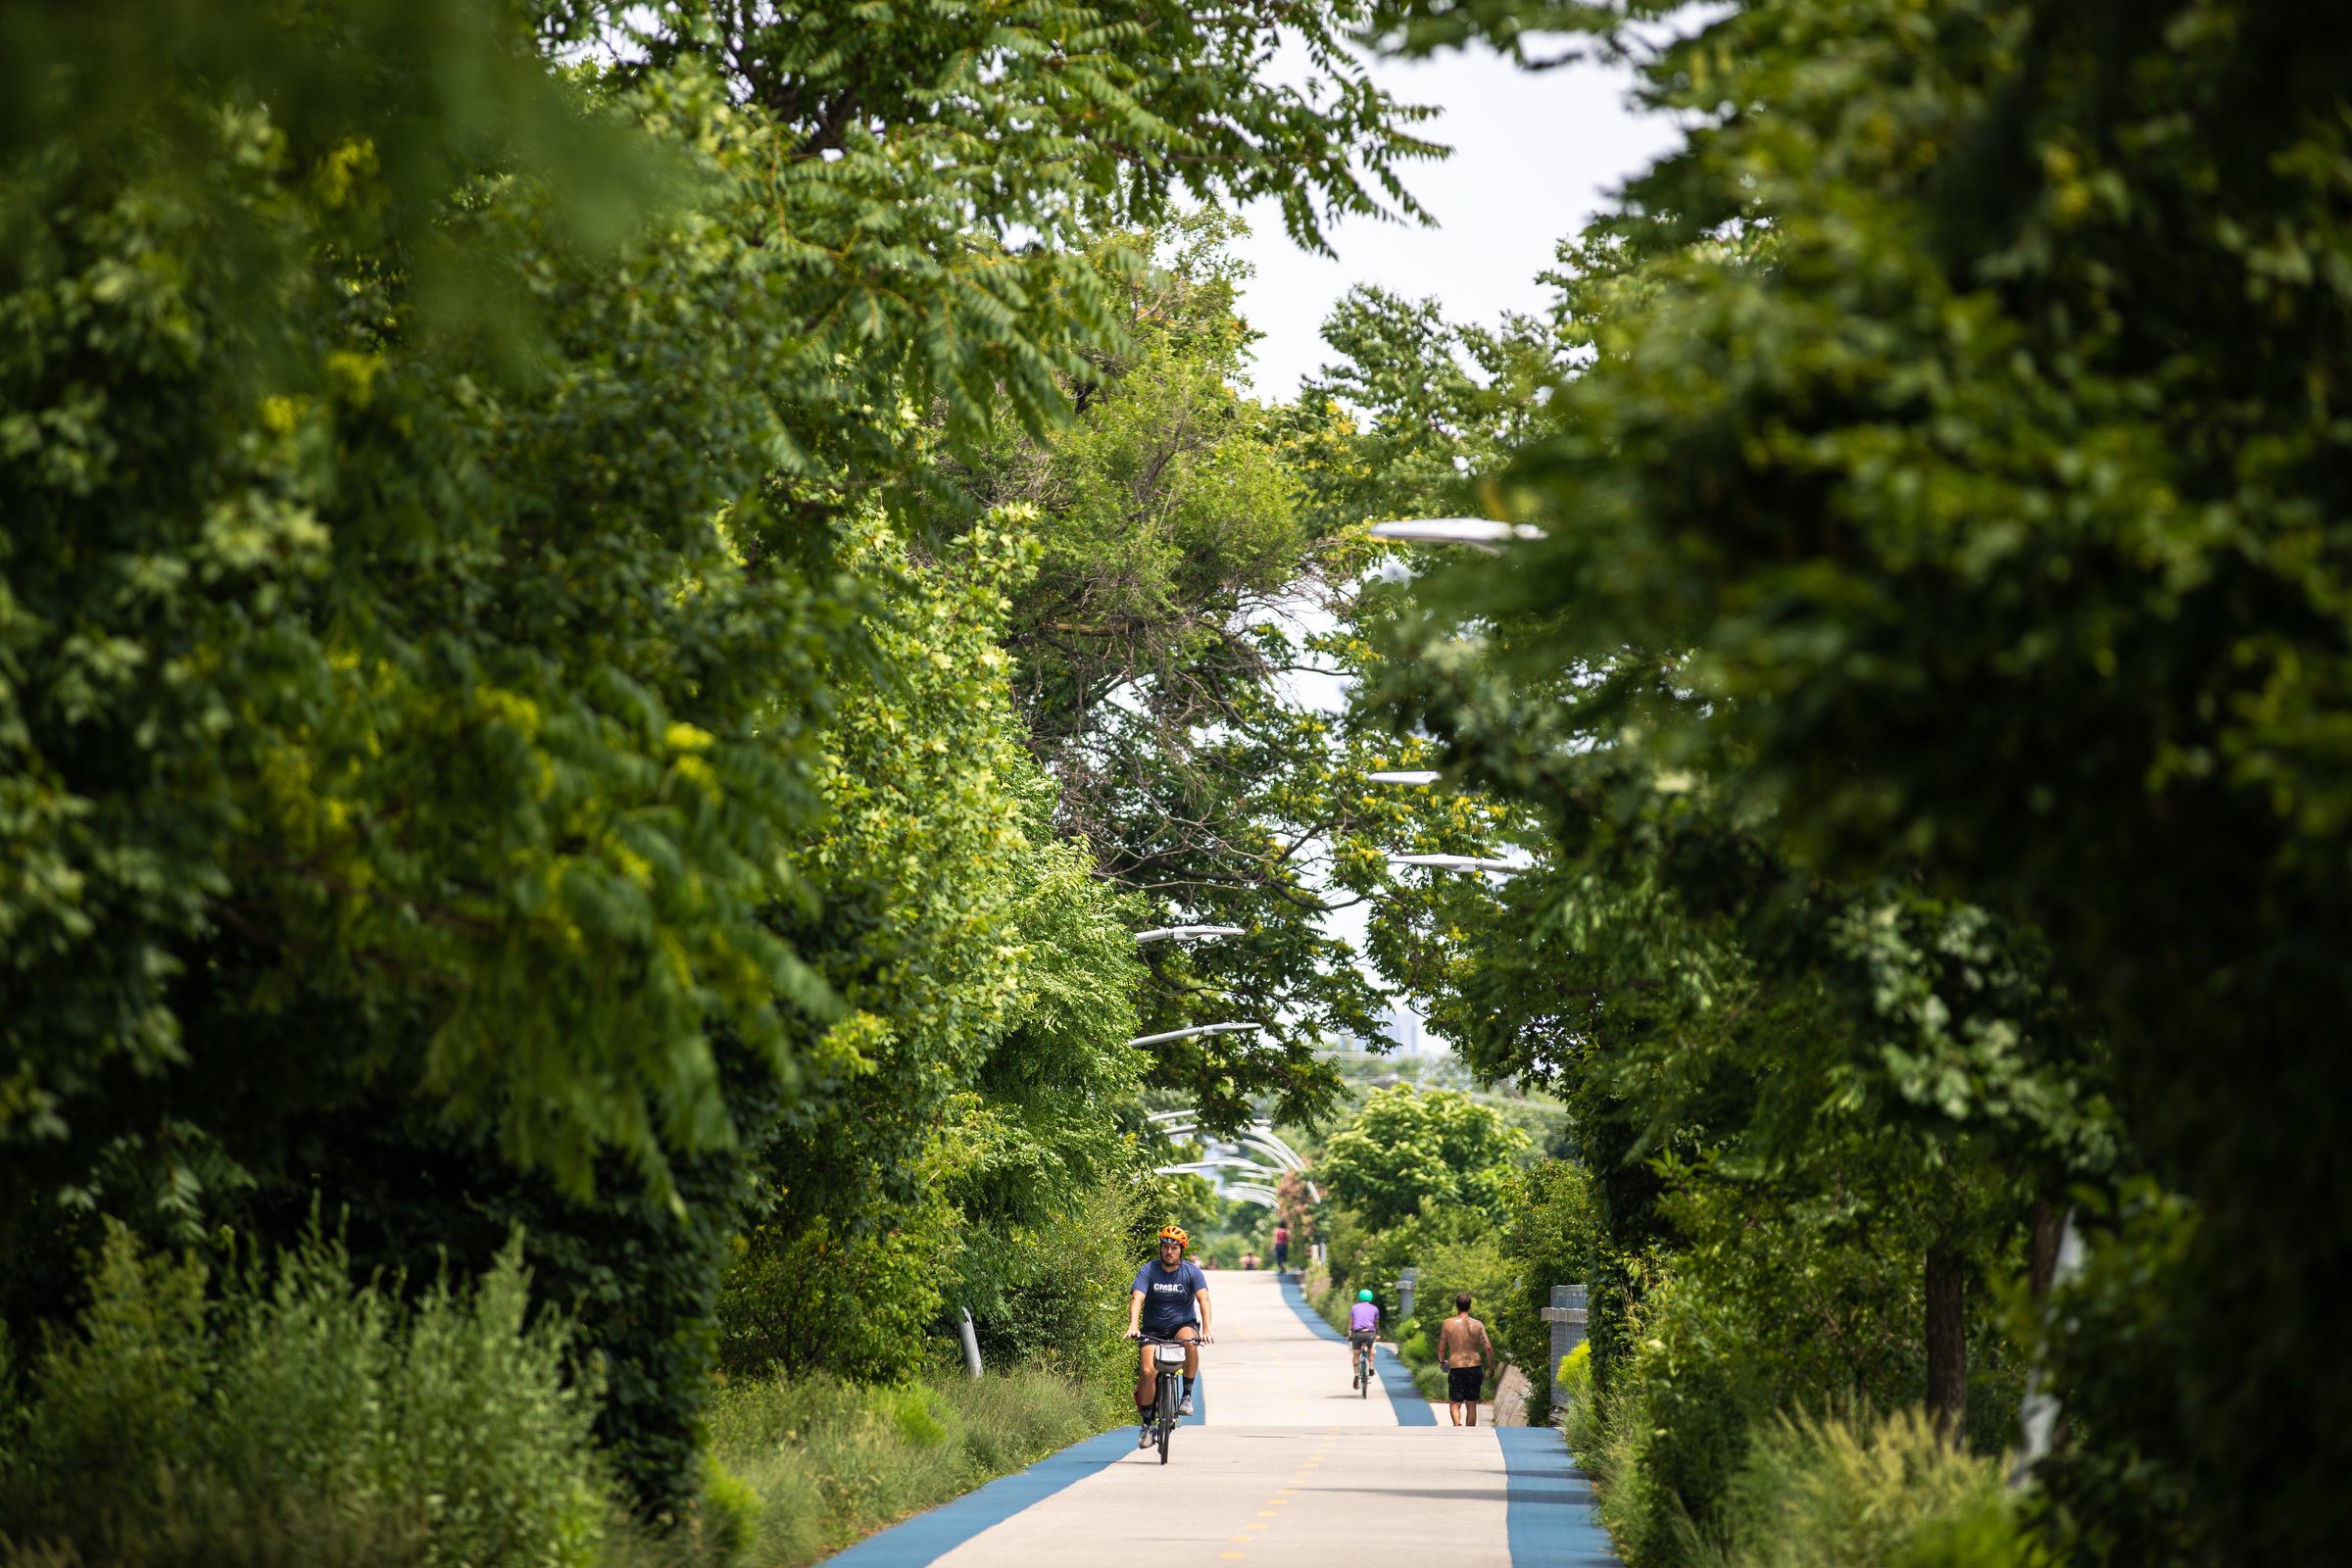 Chicago's Bloomingdale Trail, also known as the 